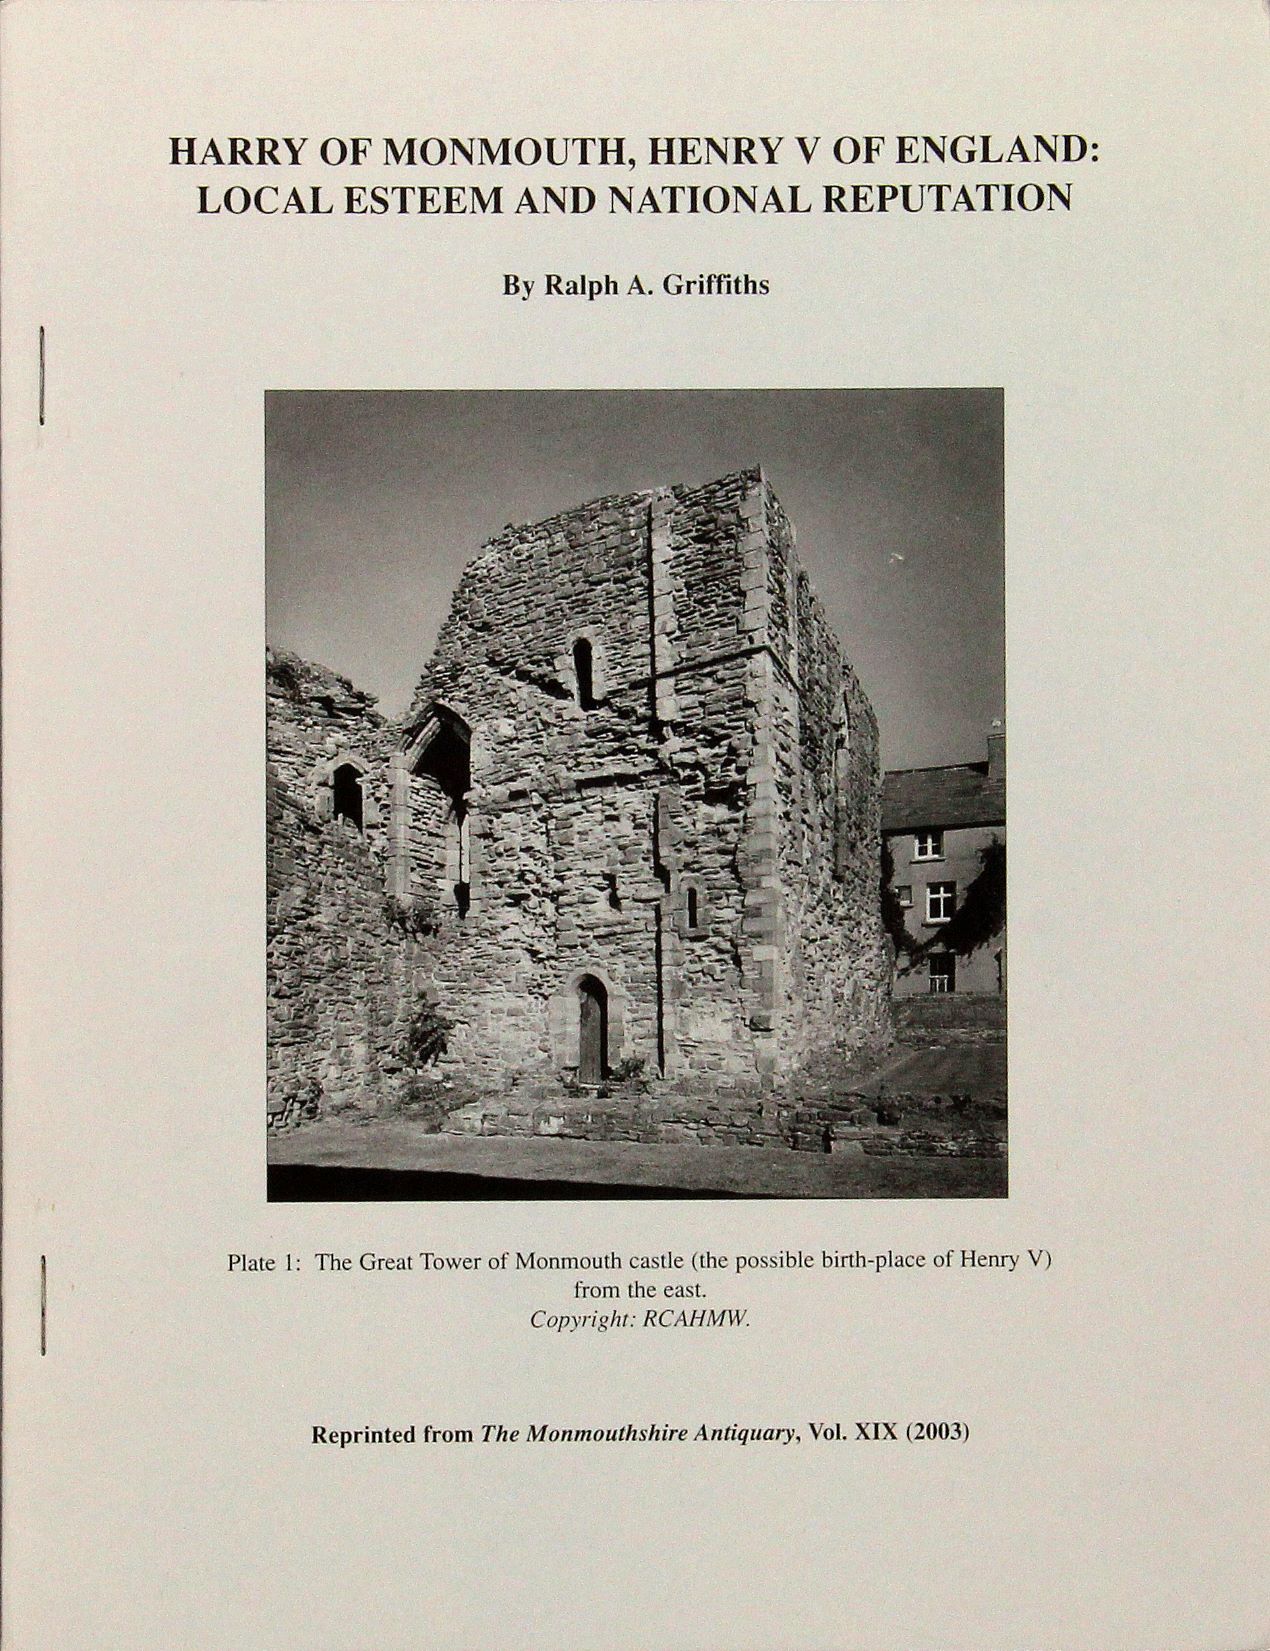 Harry of Monmouth, Henry of England: Local esteem and national reputation (reprinted from The Monmouthshire Antiquity), Ralph Griffiths, 2003, £1.00